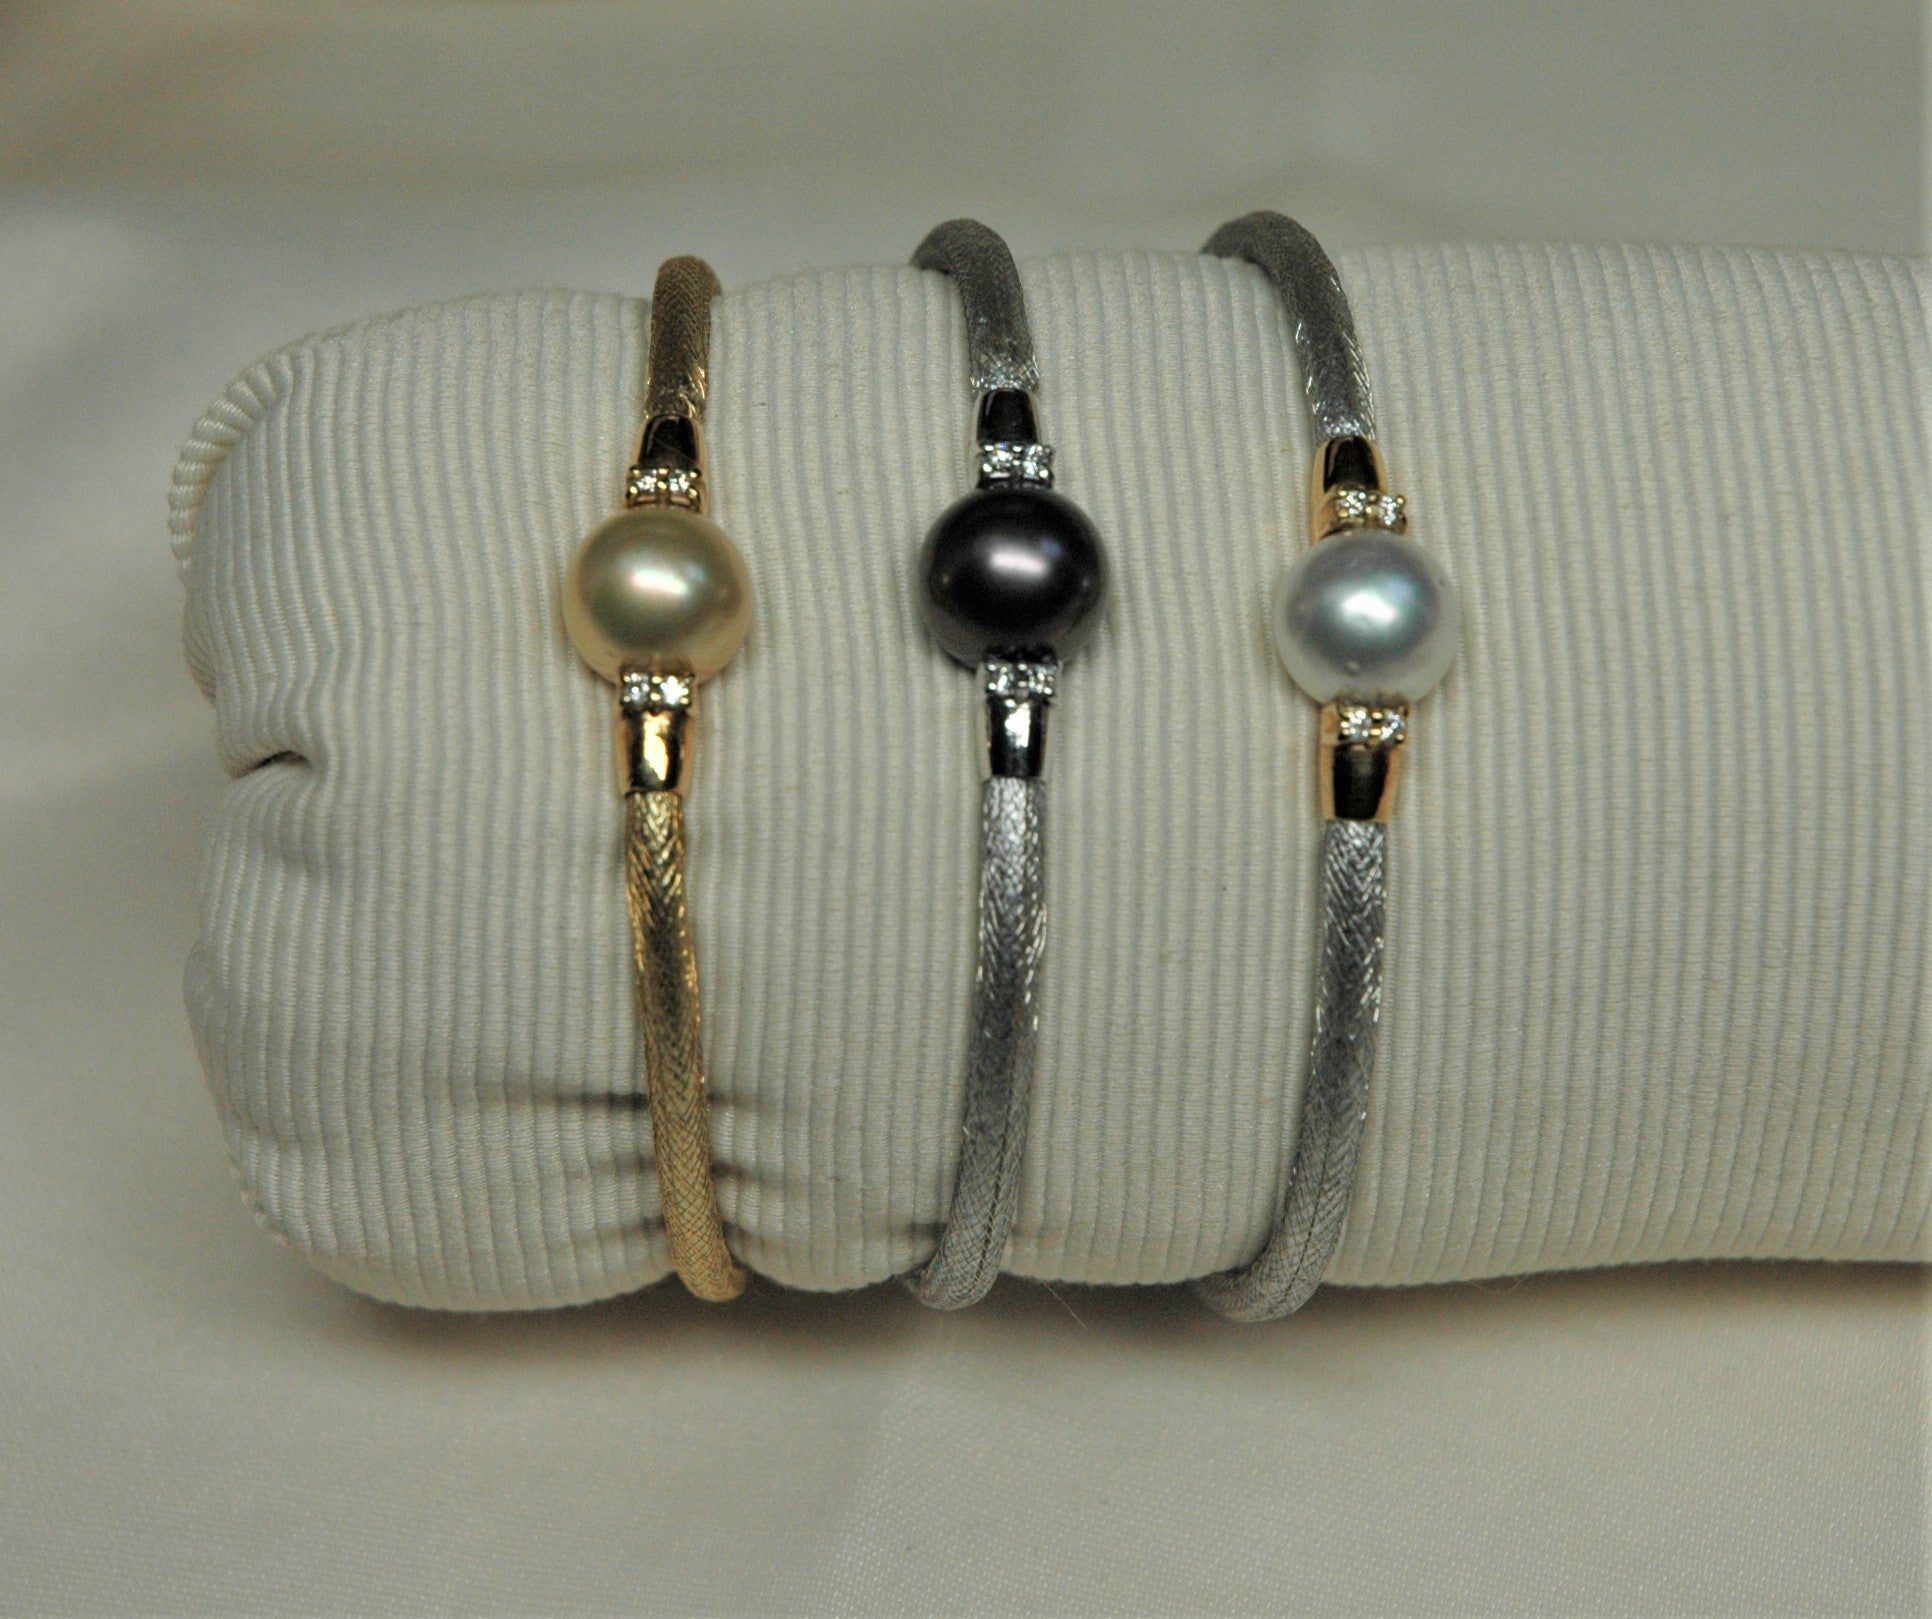 Three semi-rigid bracelets made of yellow and white gold with pearls and diamonds. The bracelet is made with an intertwining system that covers an internal structure. Each bracelet mounts a pearl of a different color: white, gold, and black.